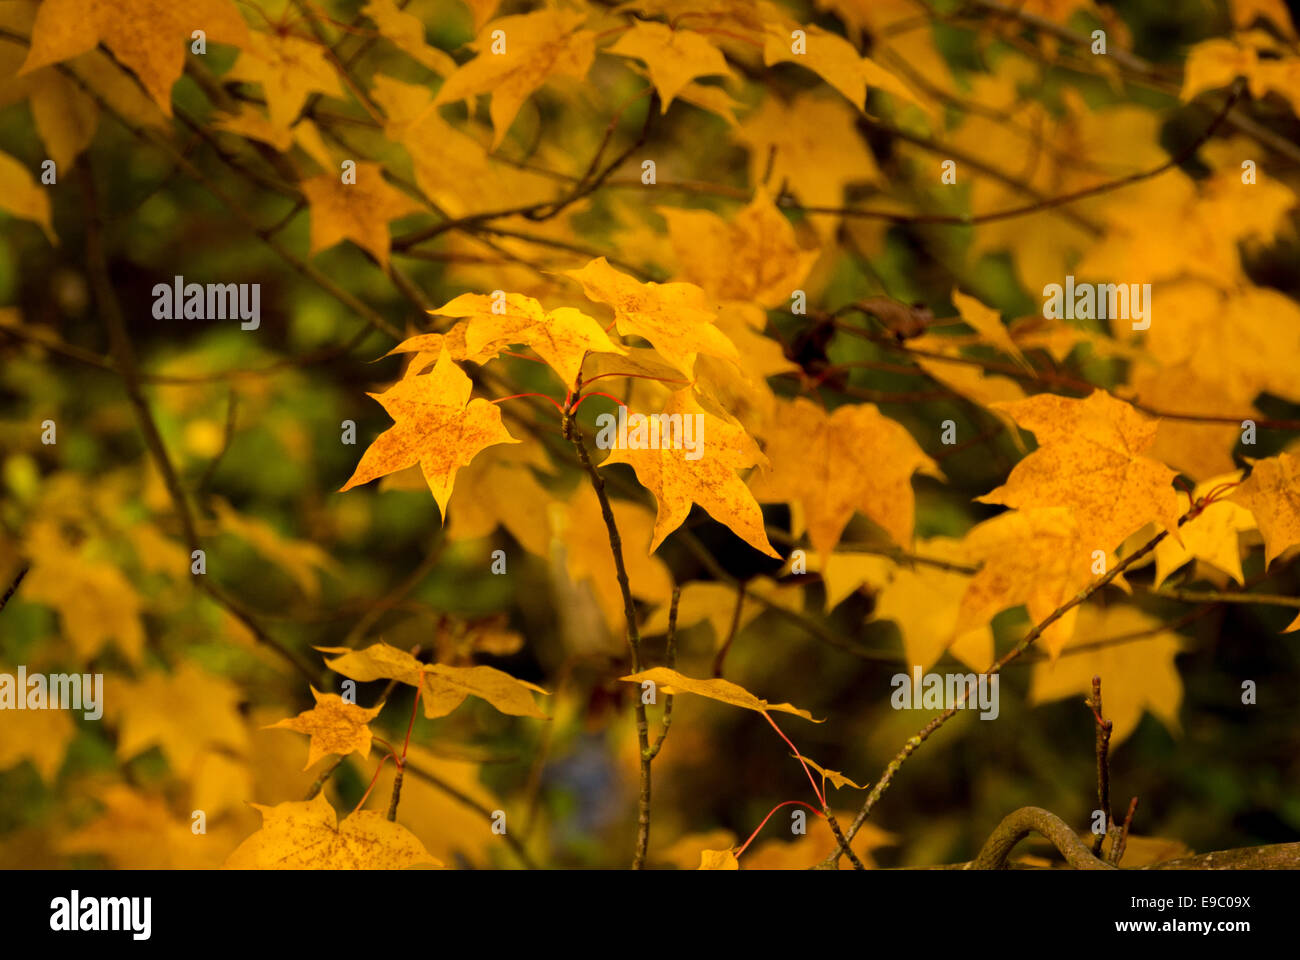 Golden leaves of a Maple tree. Stock Photo